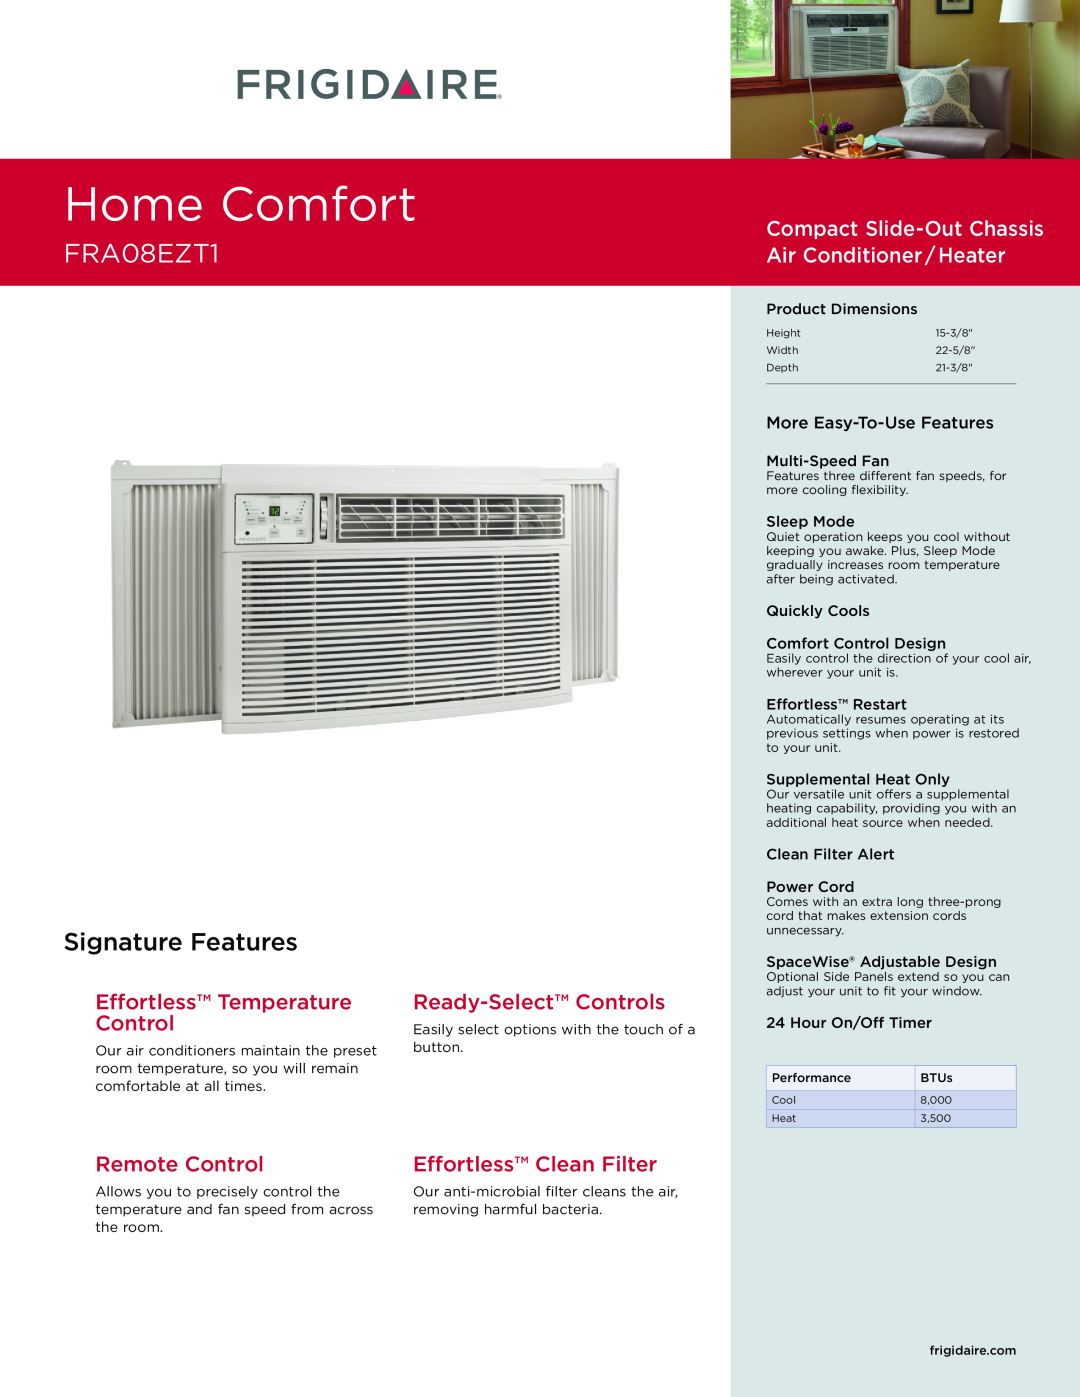 Frigidaire FRA08EZT1 dimensions Home Comfort, Signature Features, Compact Slide-Out Chassis Air Conditioner / Heater 